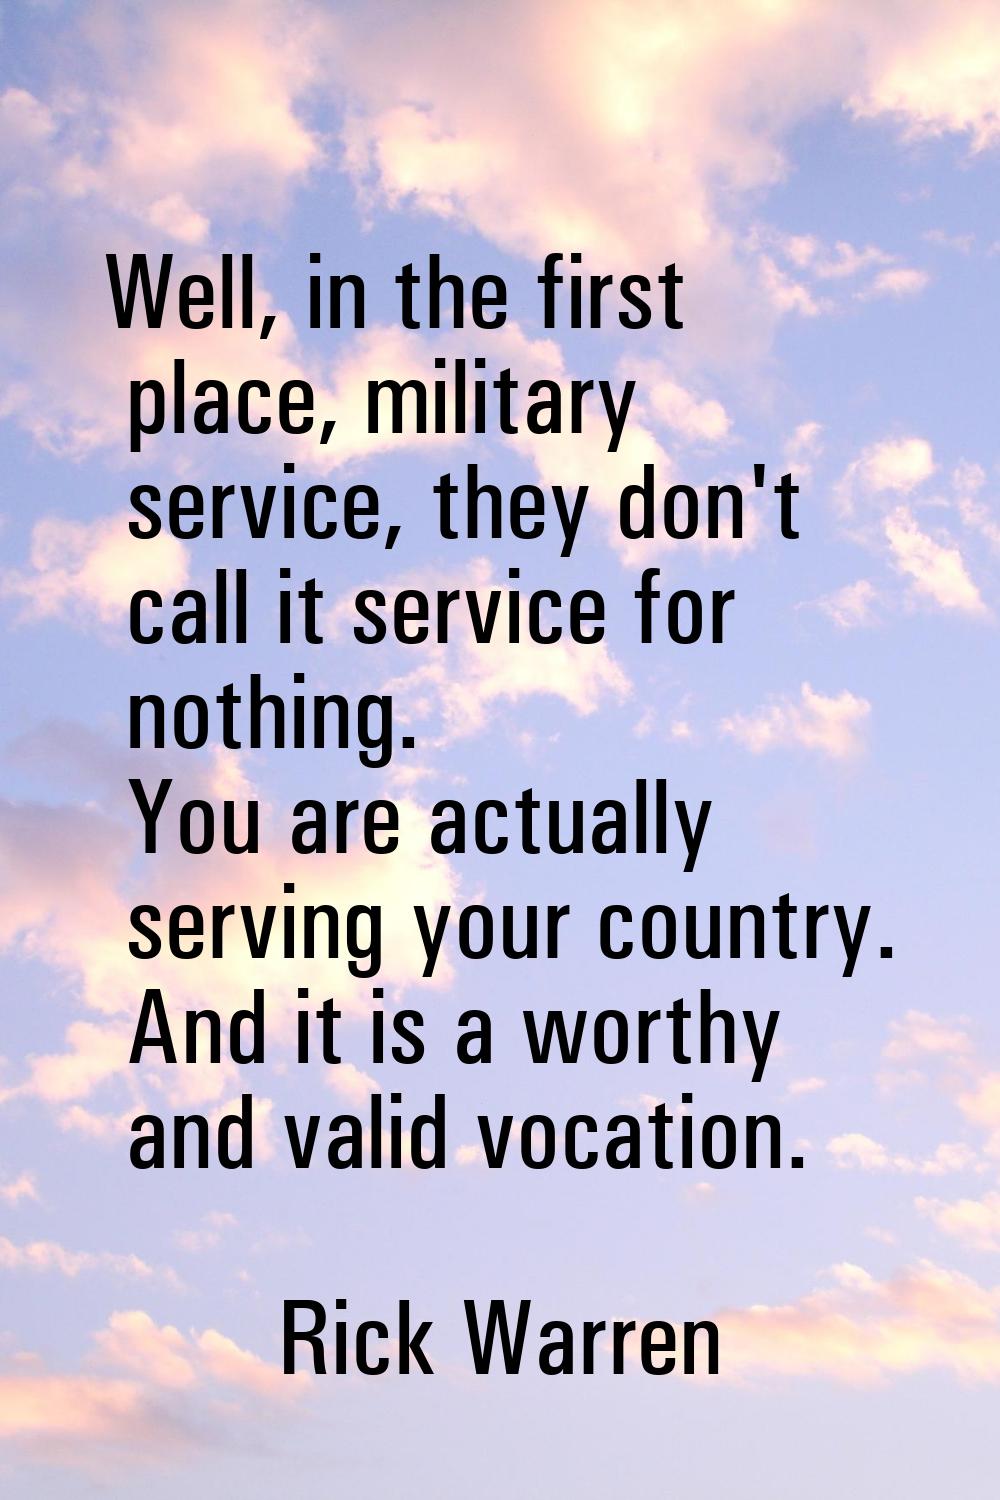 Well, in the first place, military service, they don't call it service for nothing. You are actuall